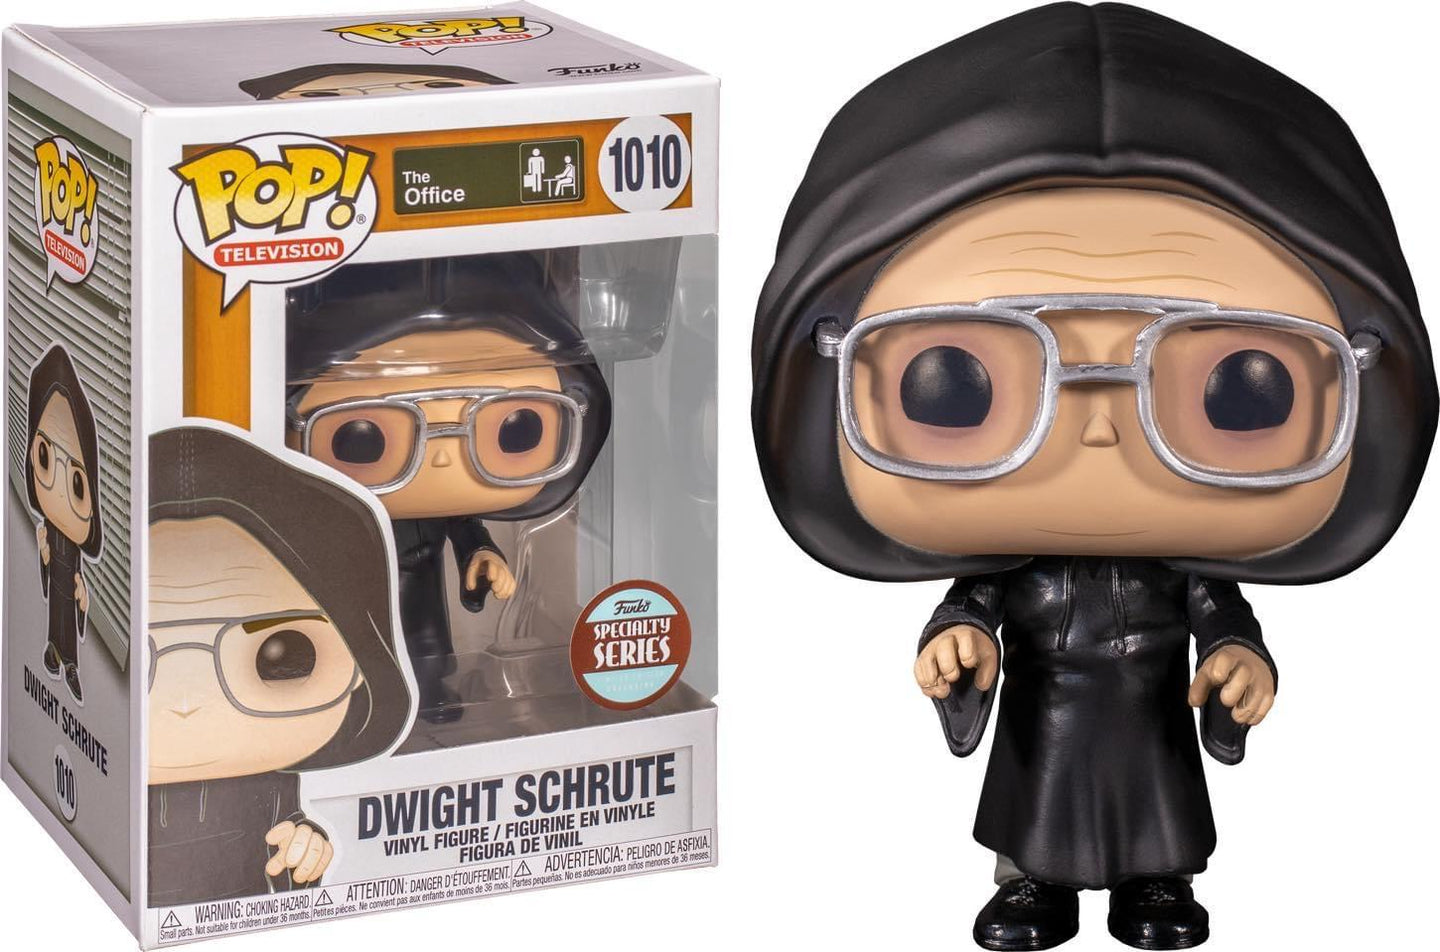 Funko Pop! TV: The Office Specialty Series - Dwight Schrute (Dark Lord)